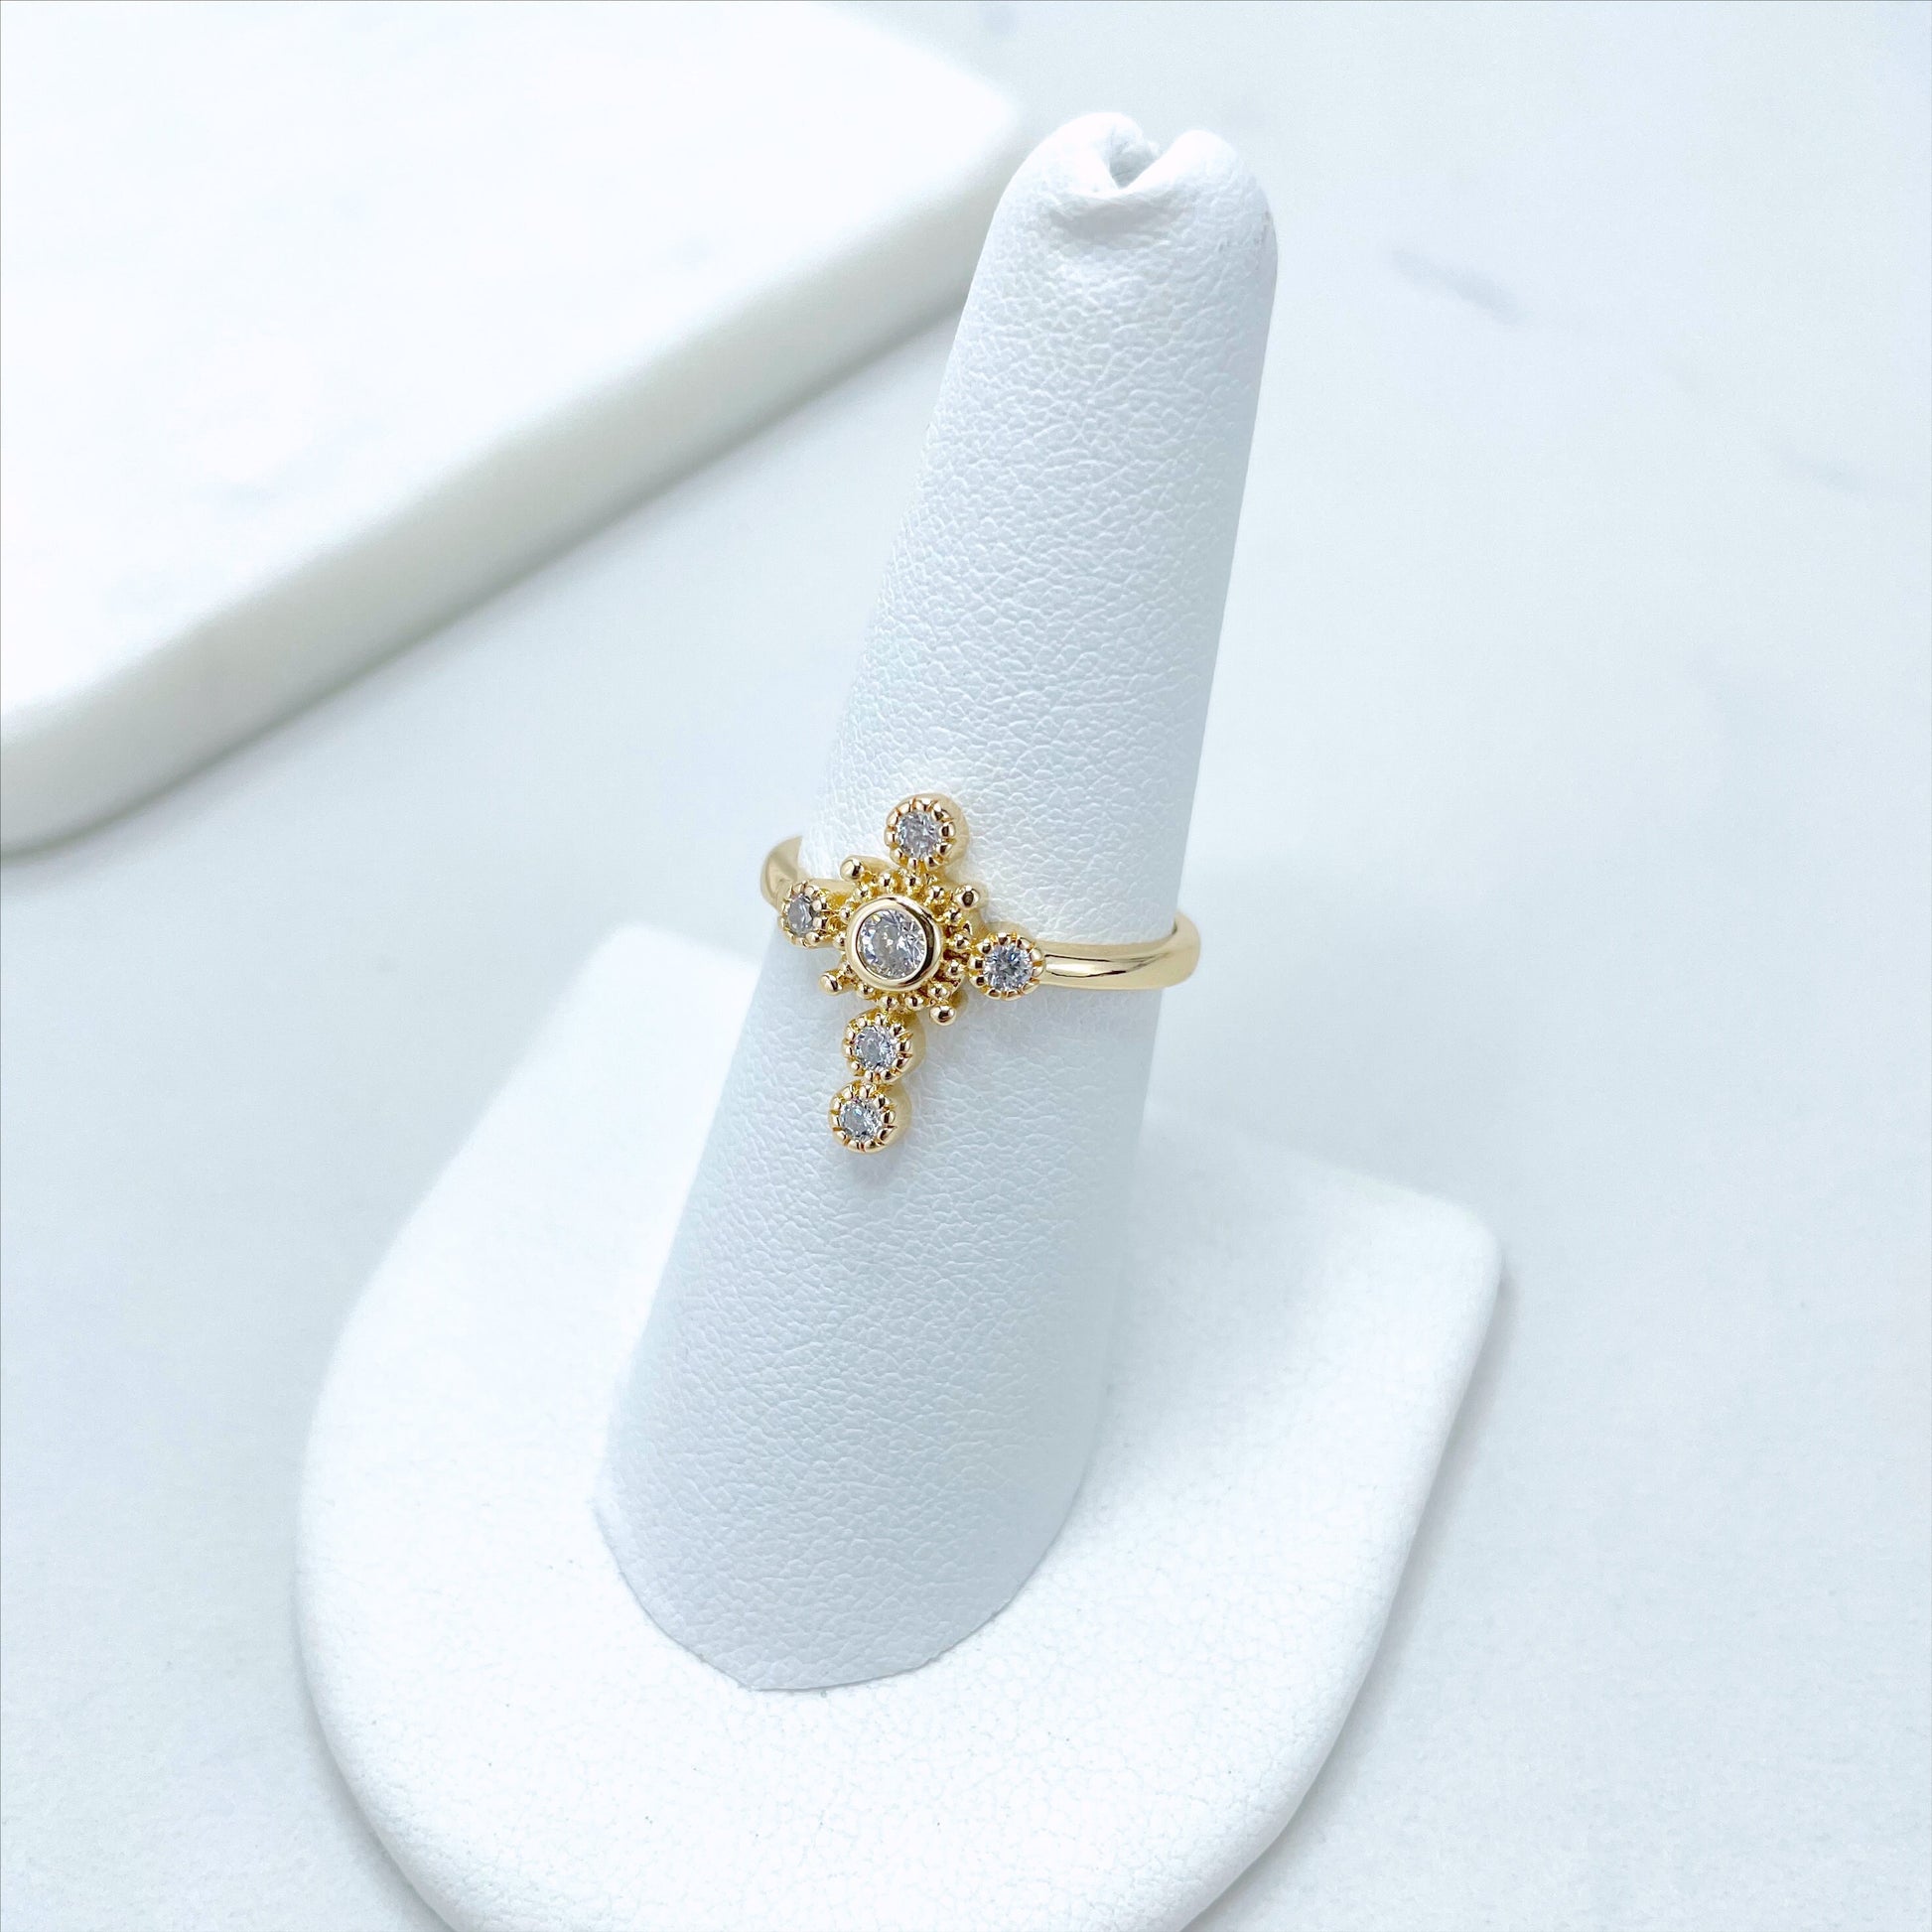 18k Gold Filled Deliciated Cross Shape Ring with Cubic Zirconia Red, White or Black, Wholesale Jewelry Making Supplies